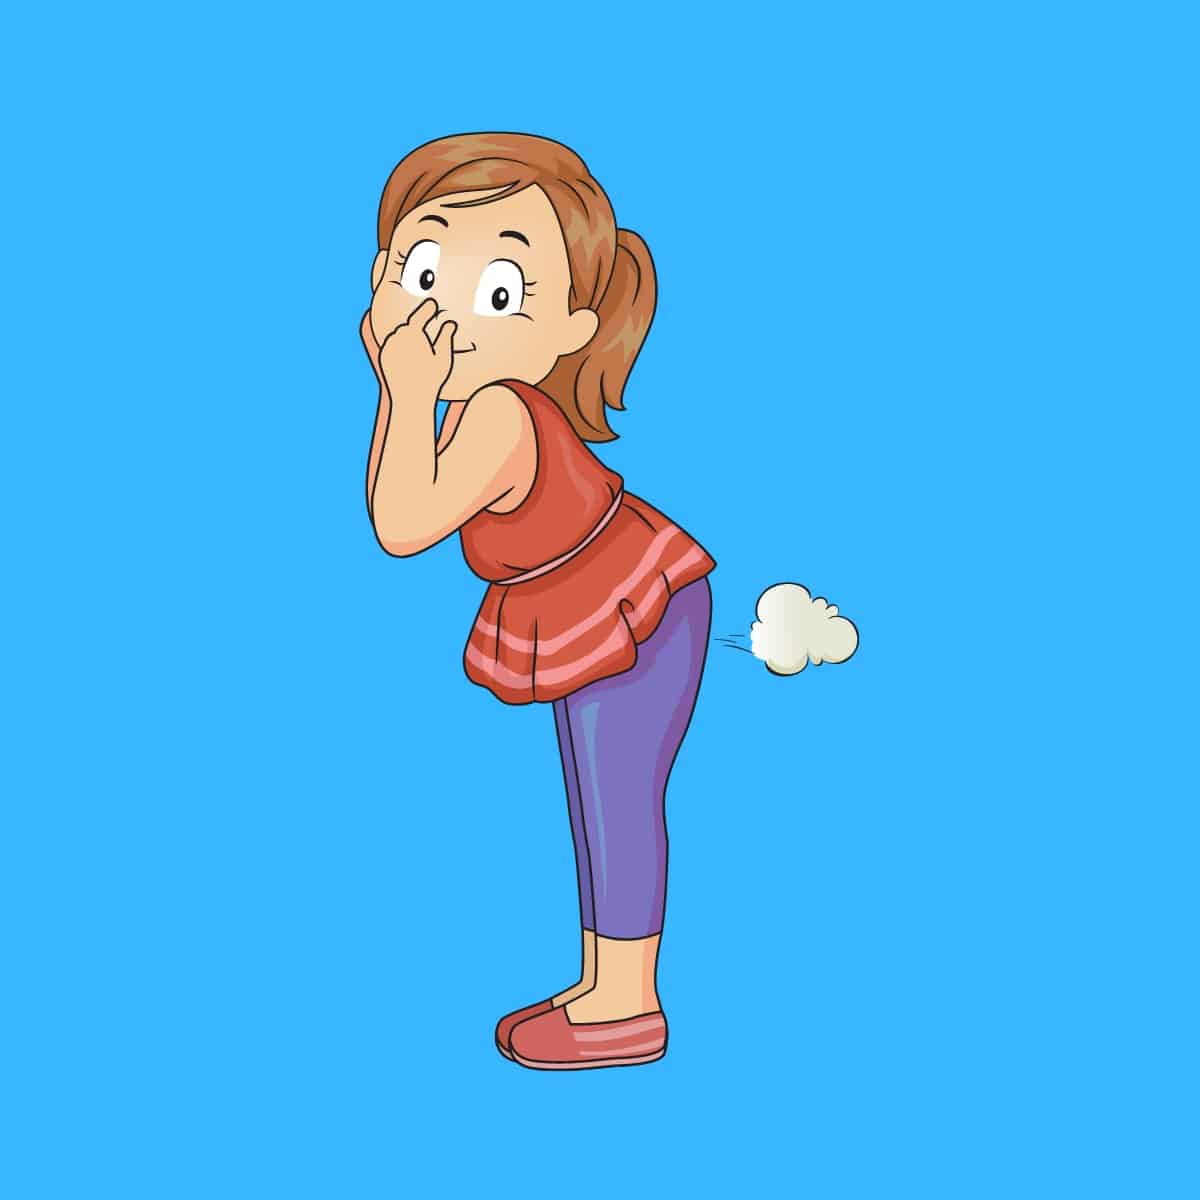 Cartoon graphic of a girl holding her nose while a little fart comes out behind her on a blue background.